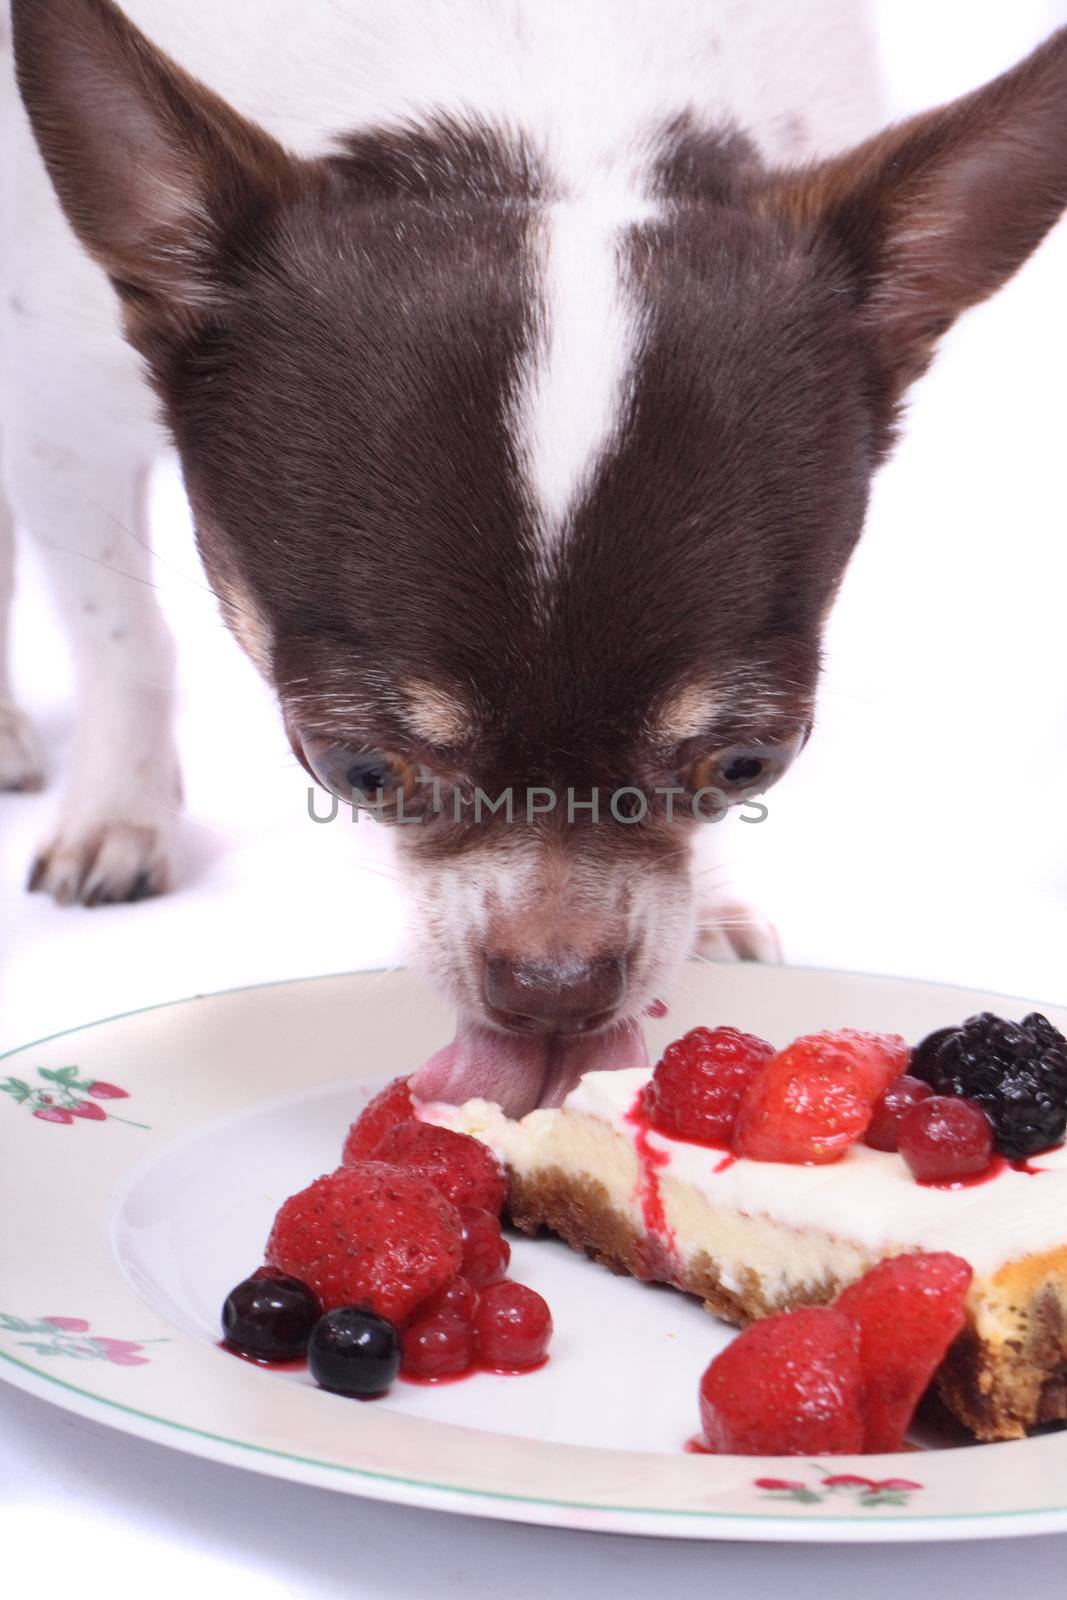 cheesecake with fruits and chihuahua on the white background 